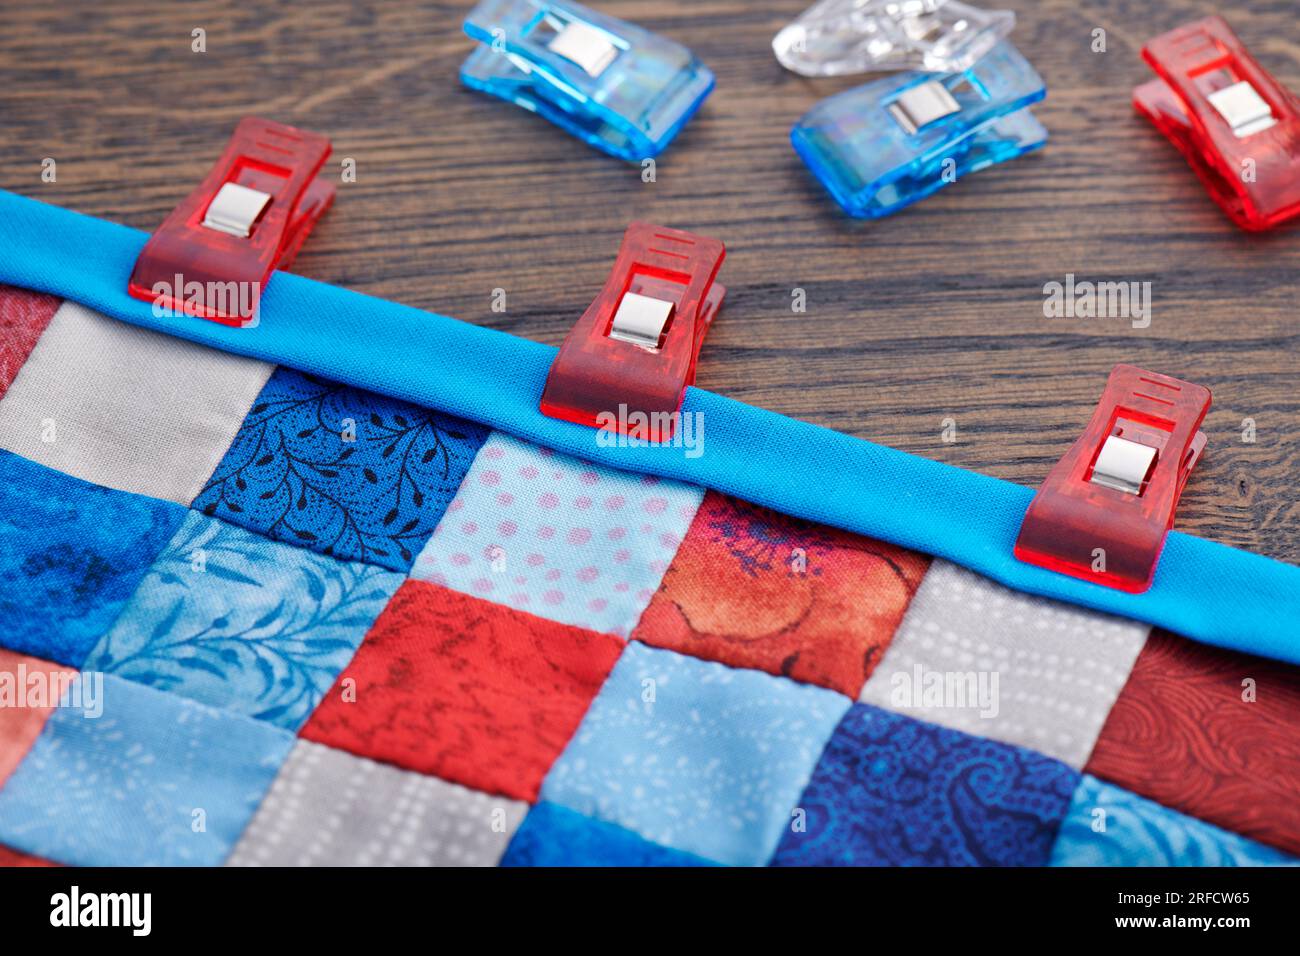 Making of quilt binding by dint of sewing quilting clips Stock Photo - Alamy